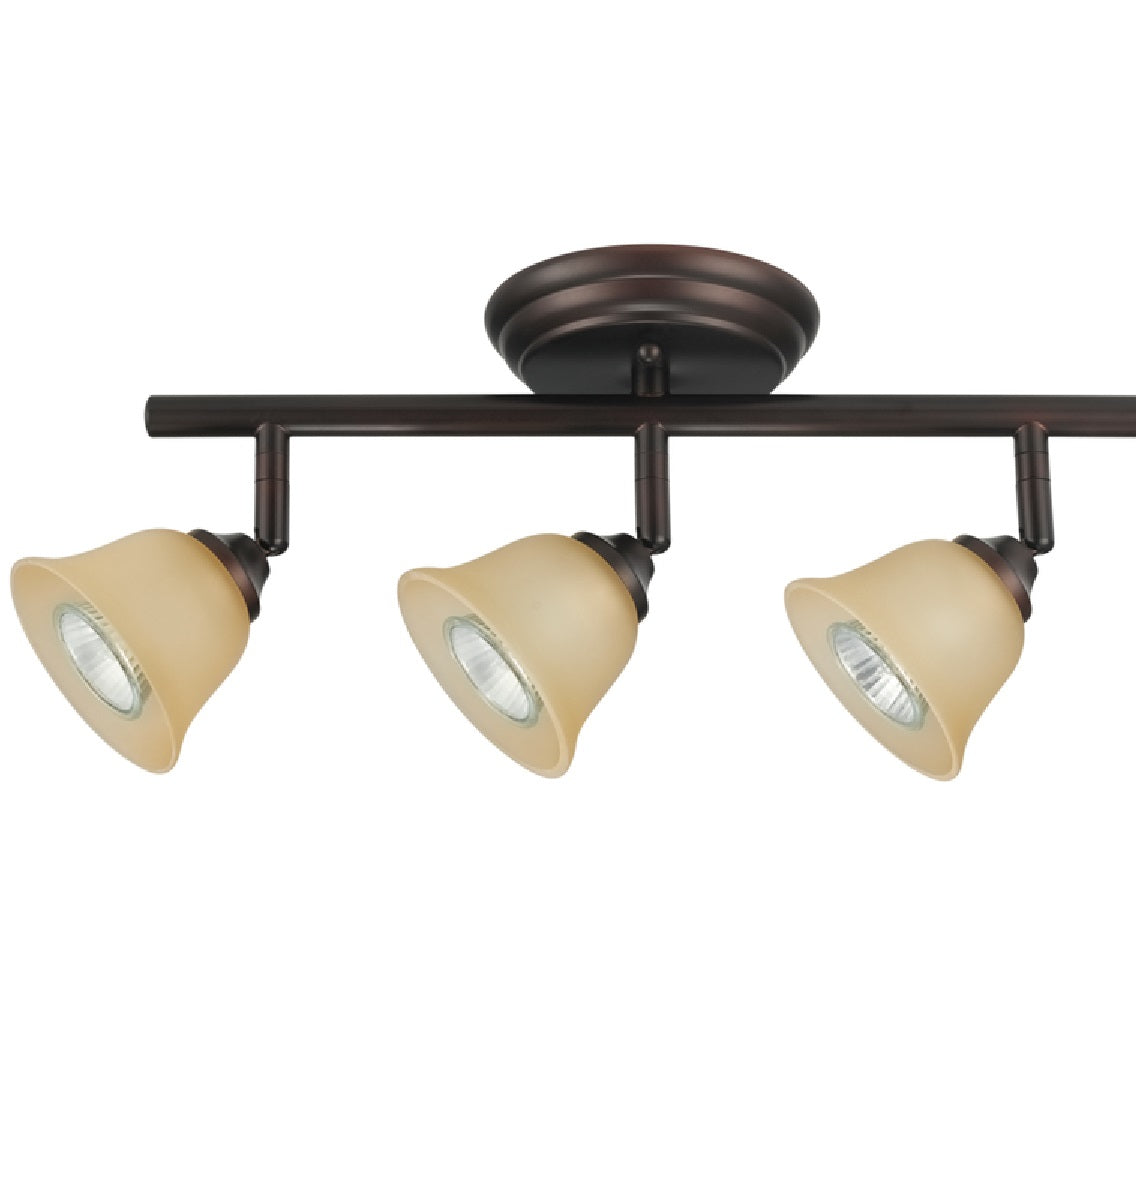 buy track light fixtures at cheap rate in bulk. wholesale & retail lighting goods & supplies store. home décor ideas, maintenance, repair replacement parts